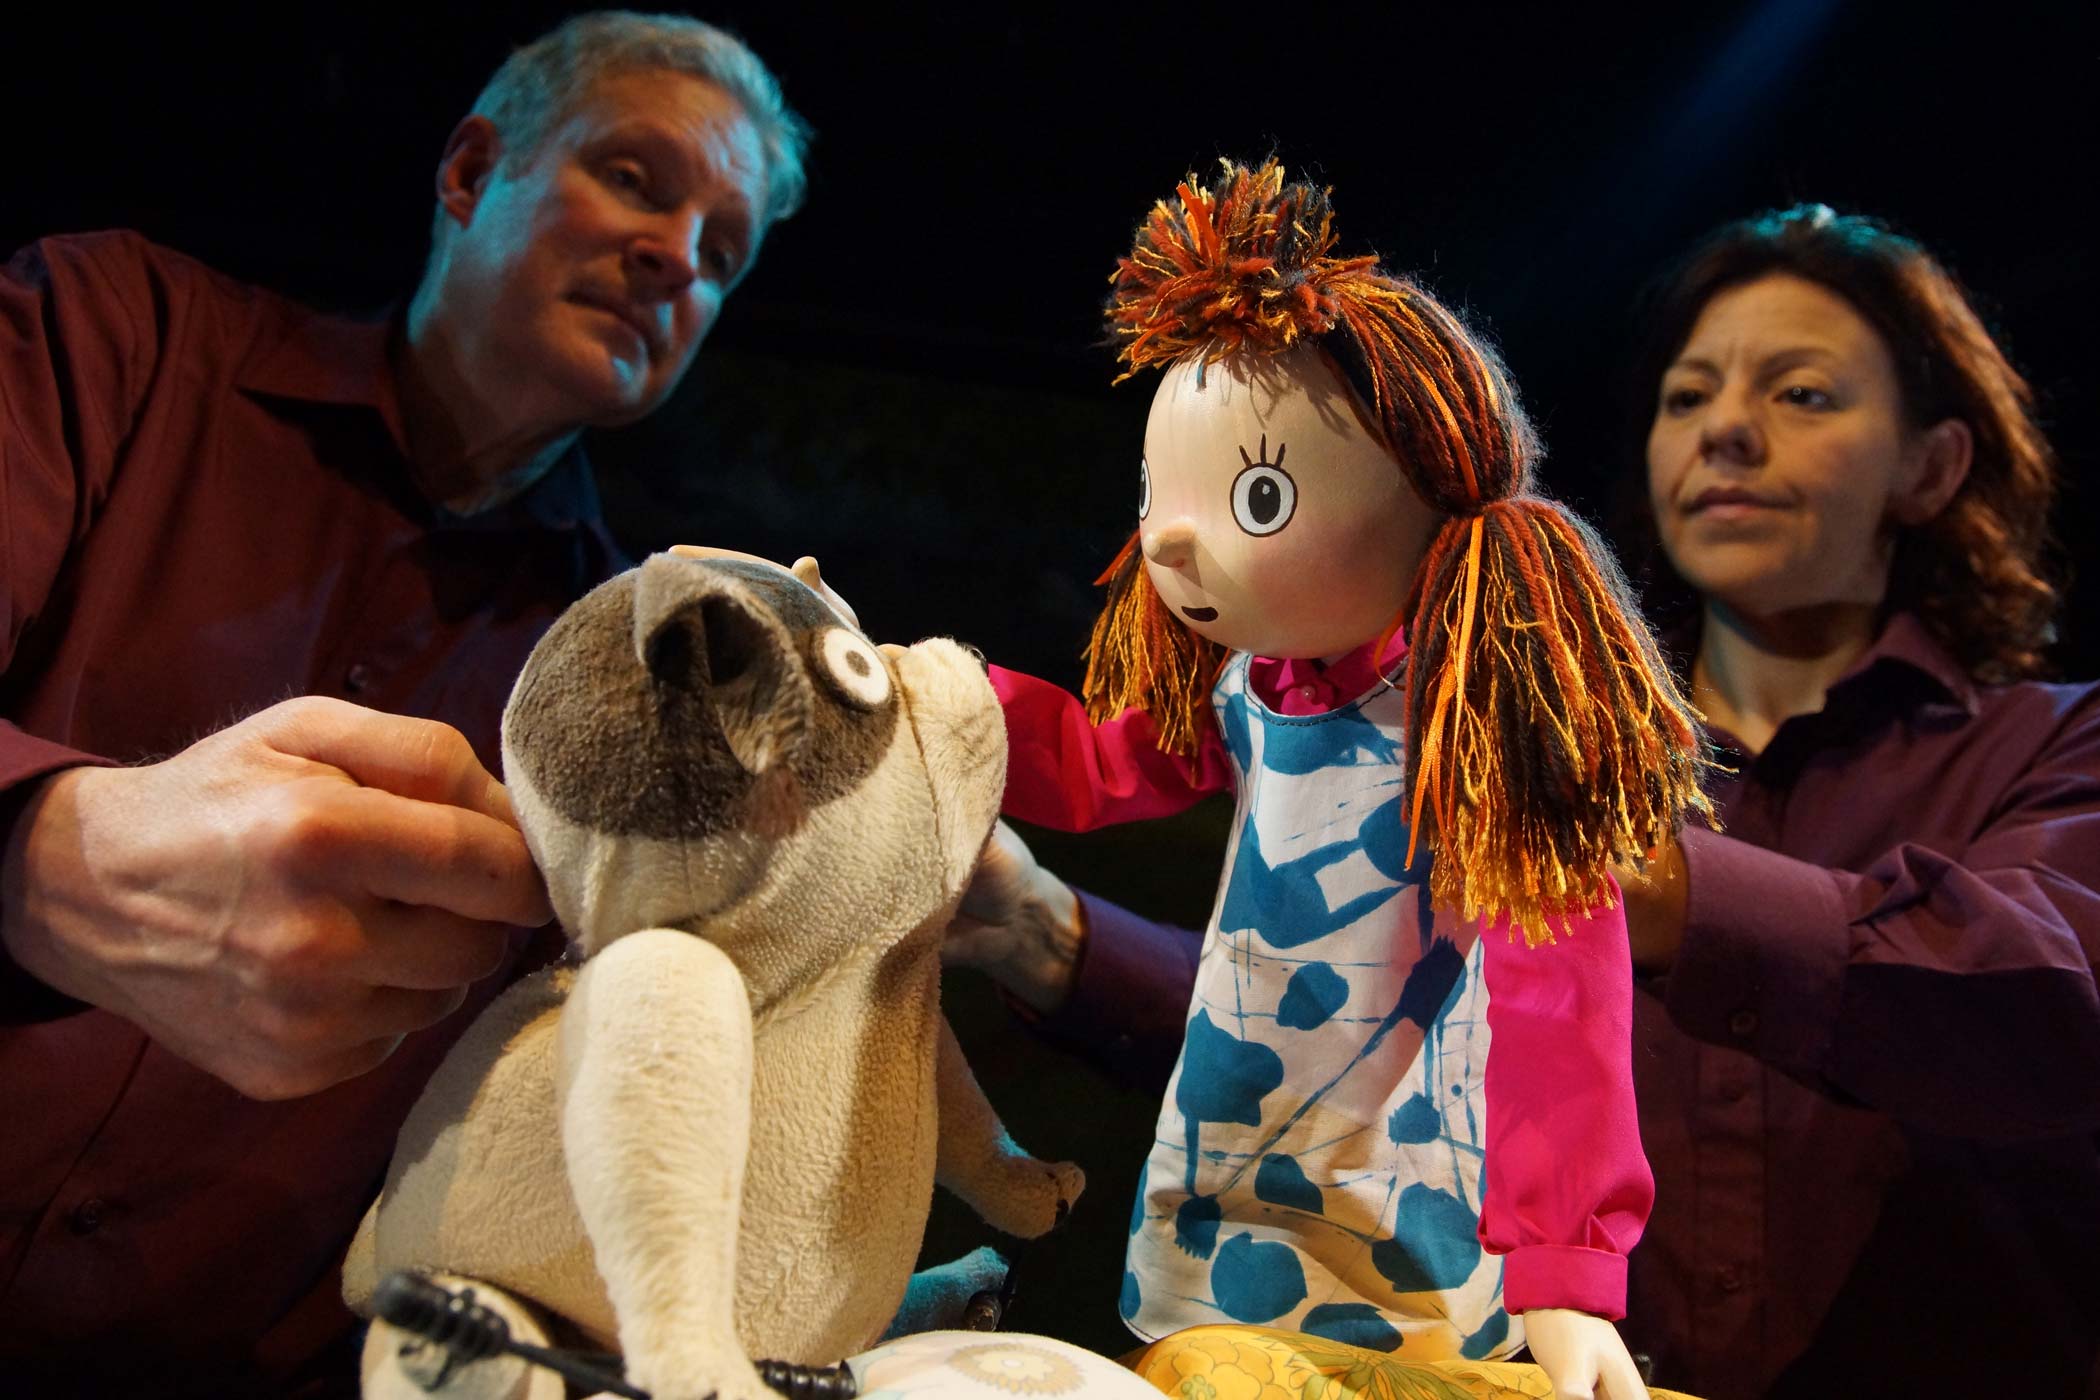 Two puppeteers hold puppets of Biff (a small dog) and Anna (a small girl) who are looking at eachother